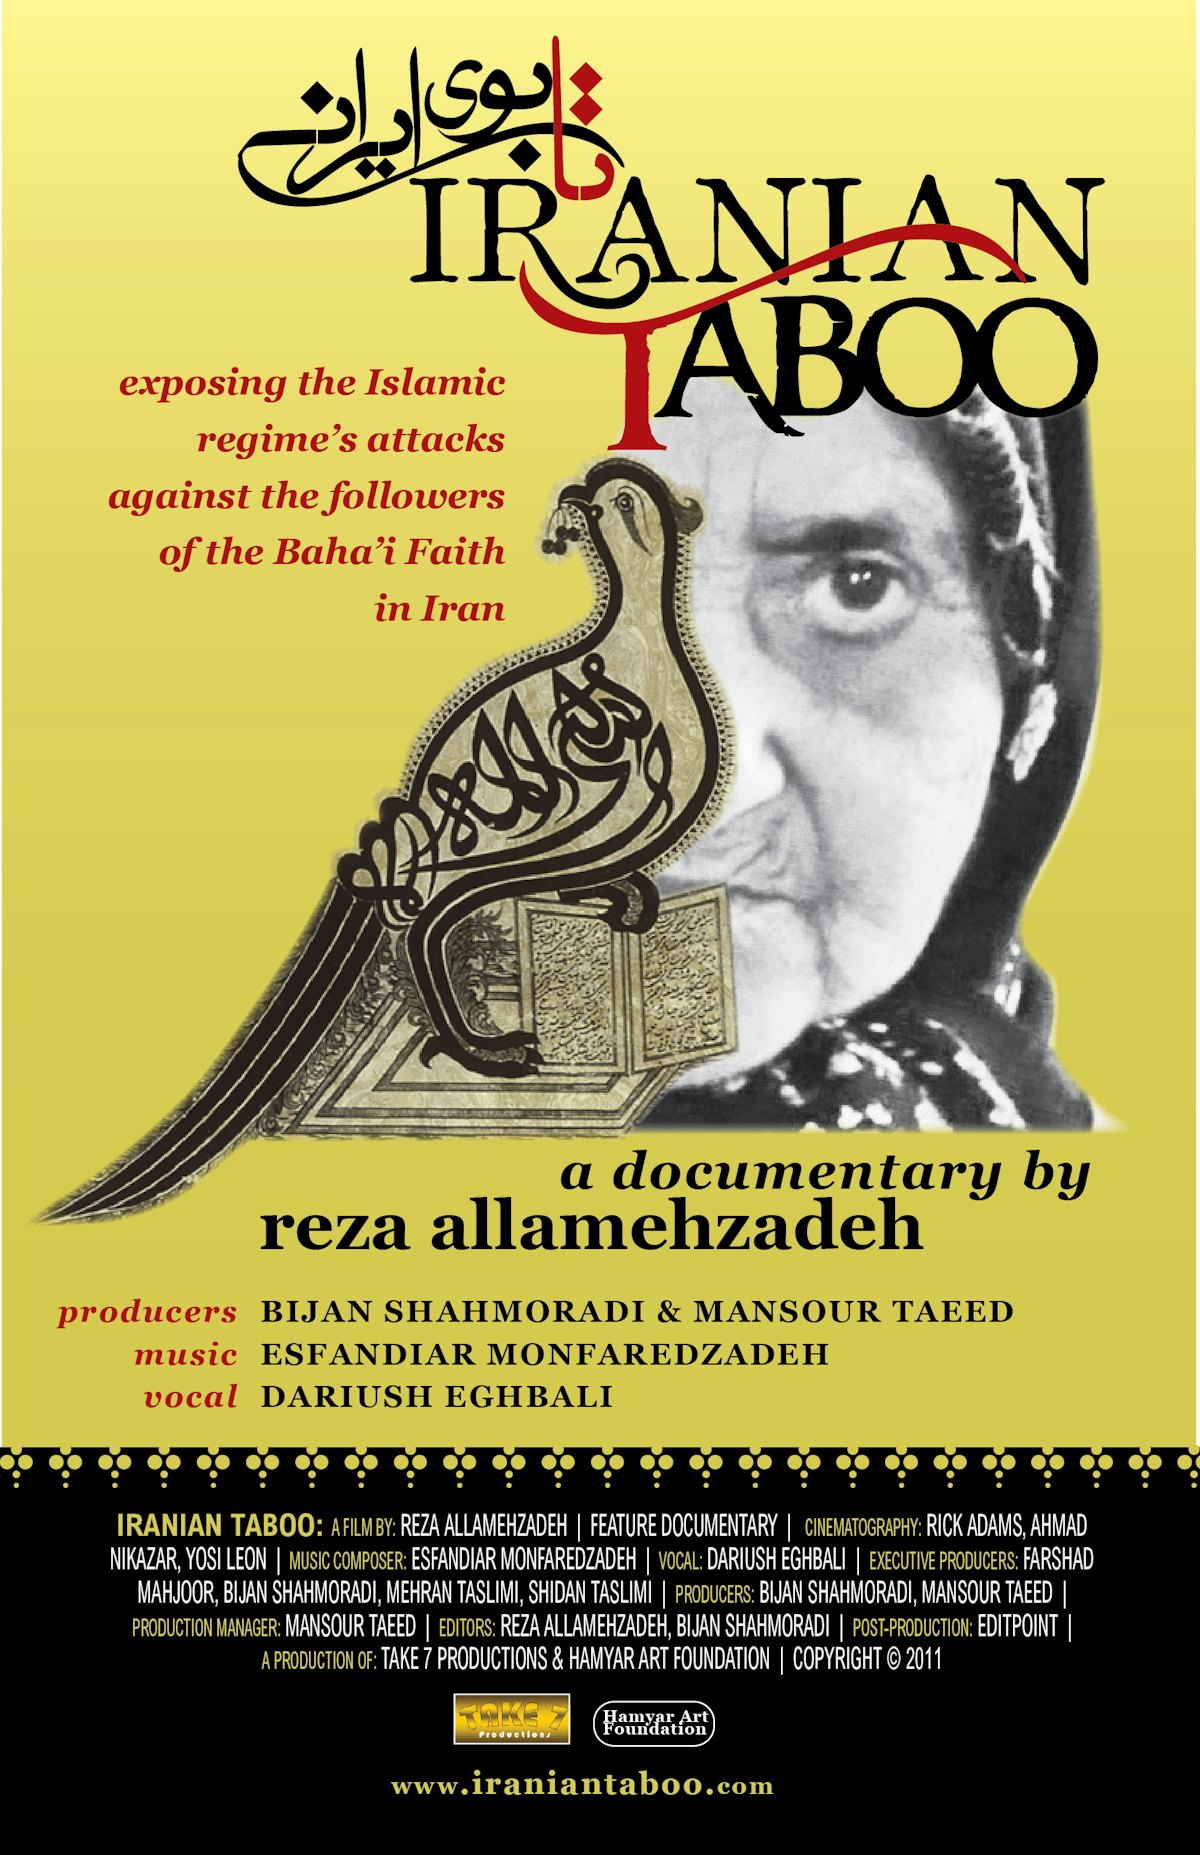 The publicity poster for "Iranian Taboo." The film opens on Friday 24 February in Los Angeles and will be screened in the coming weeks in the Netherlands, in Canada, and around the United States.